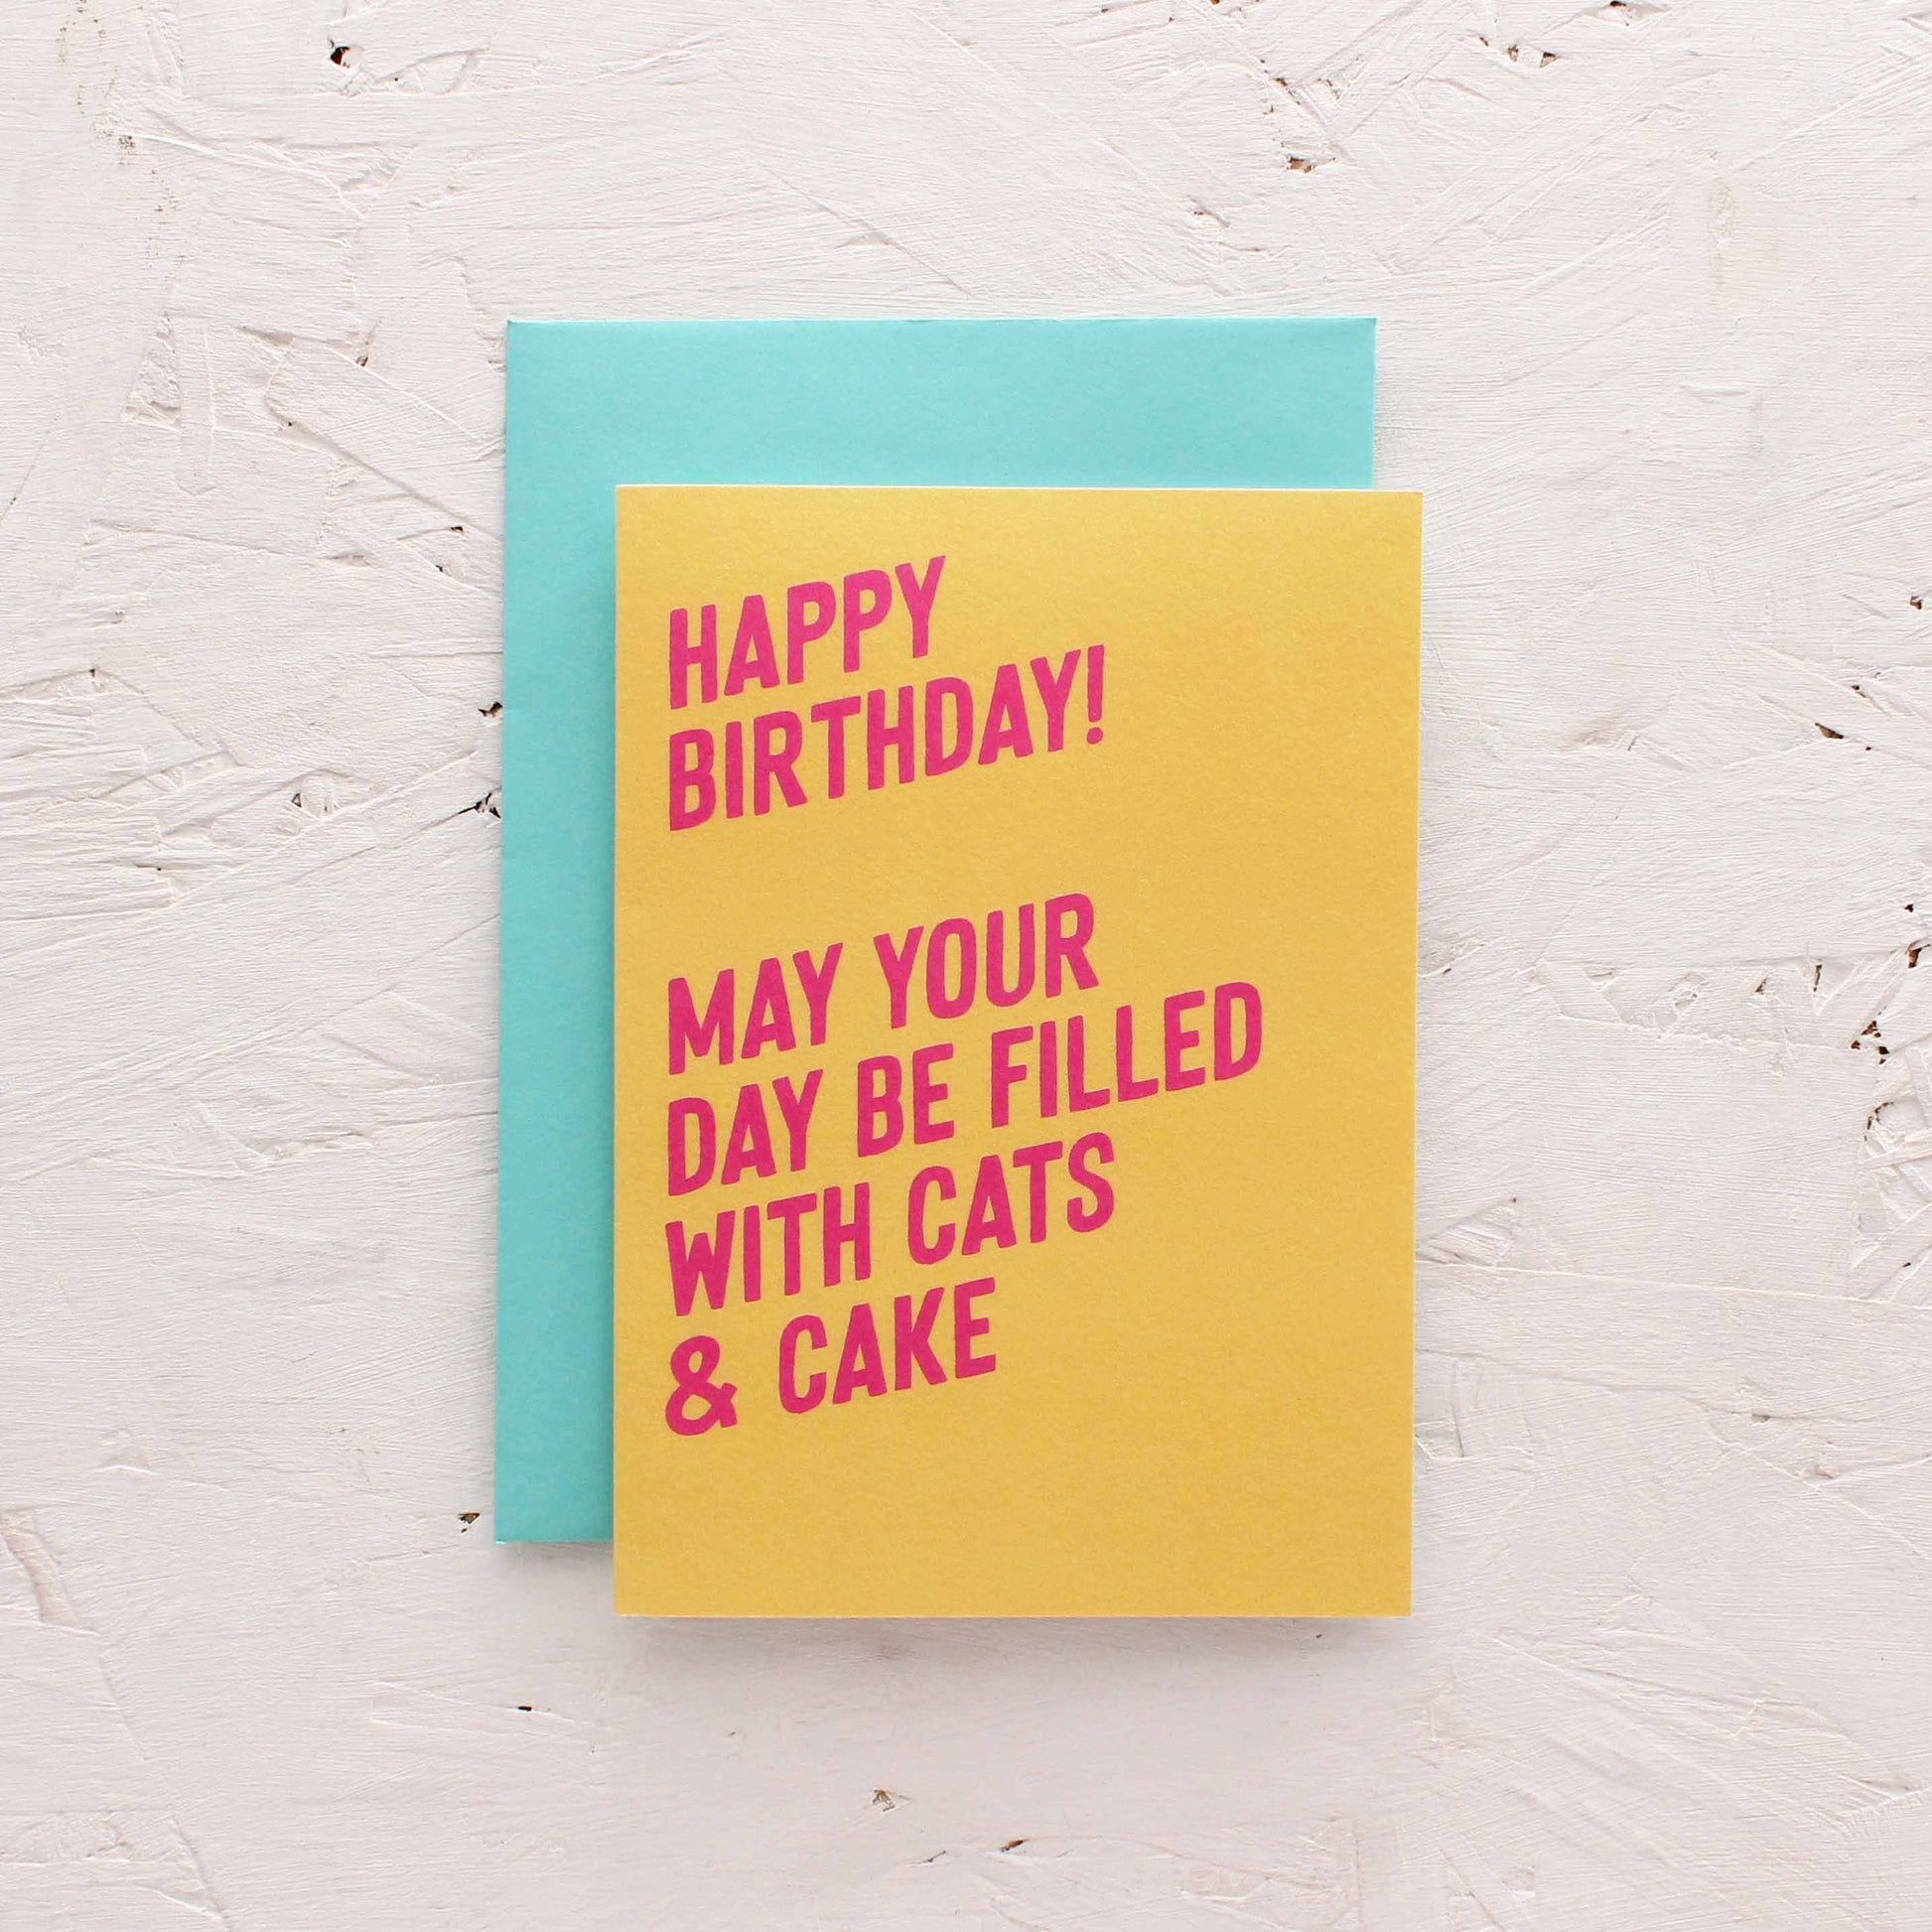 Cats and cake birthday card from Purple Tree Designs